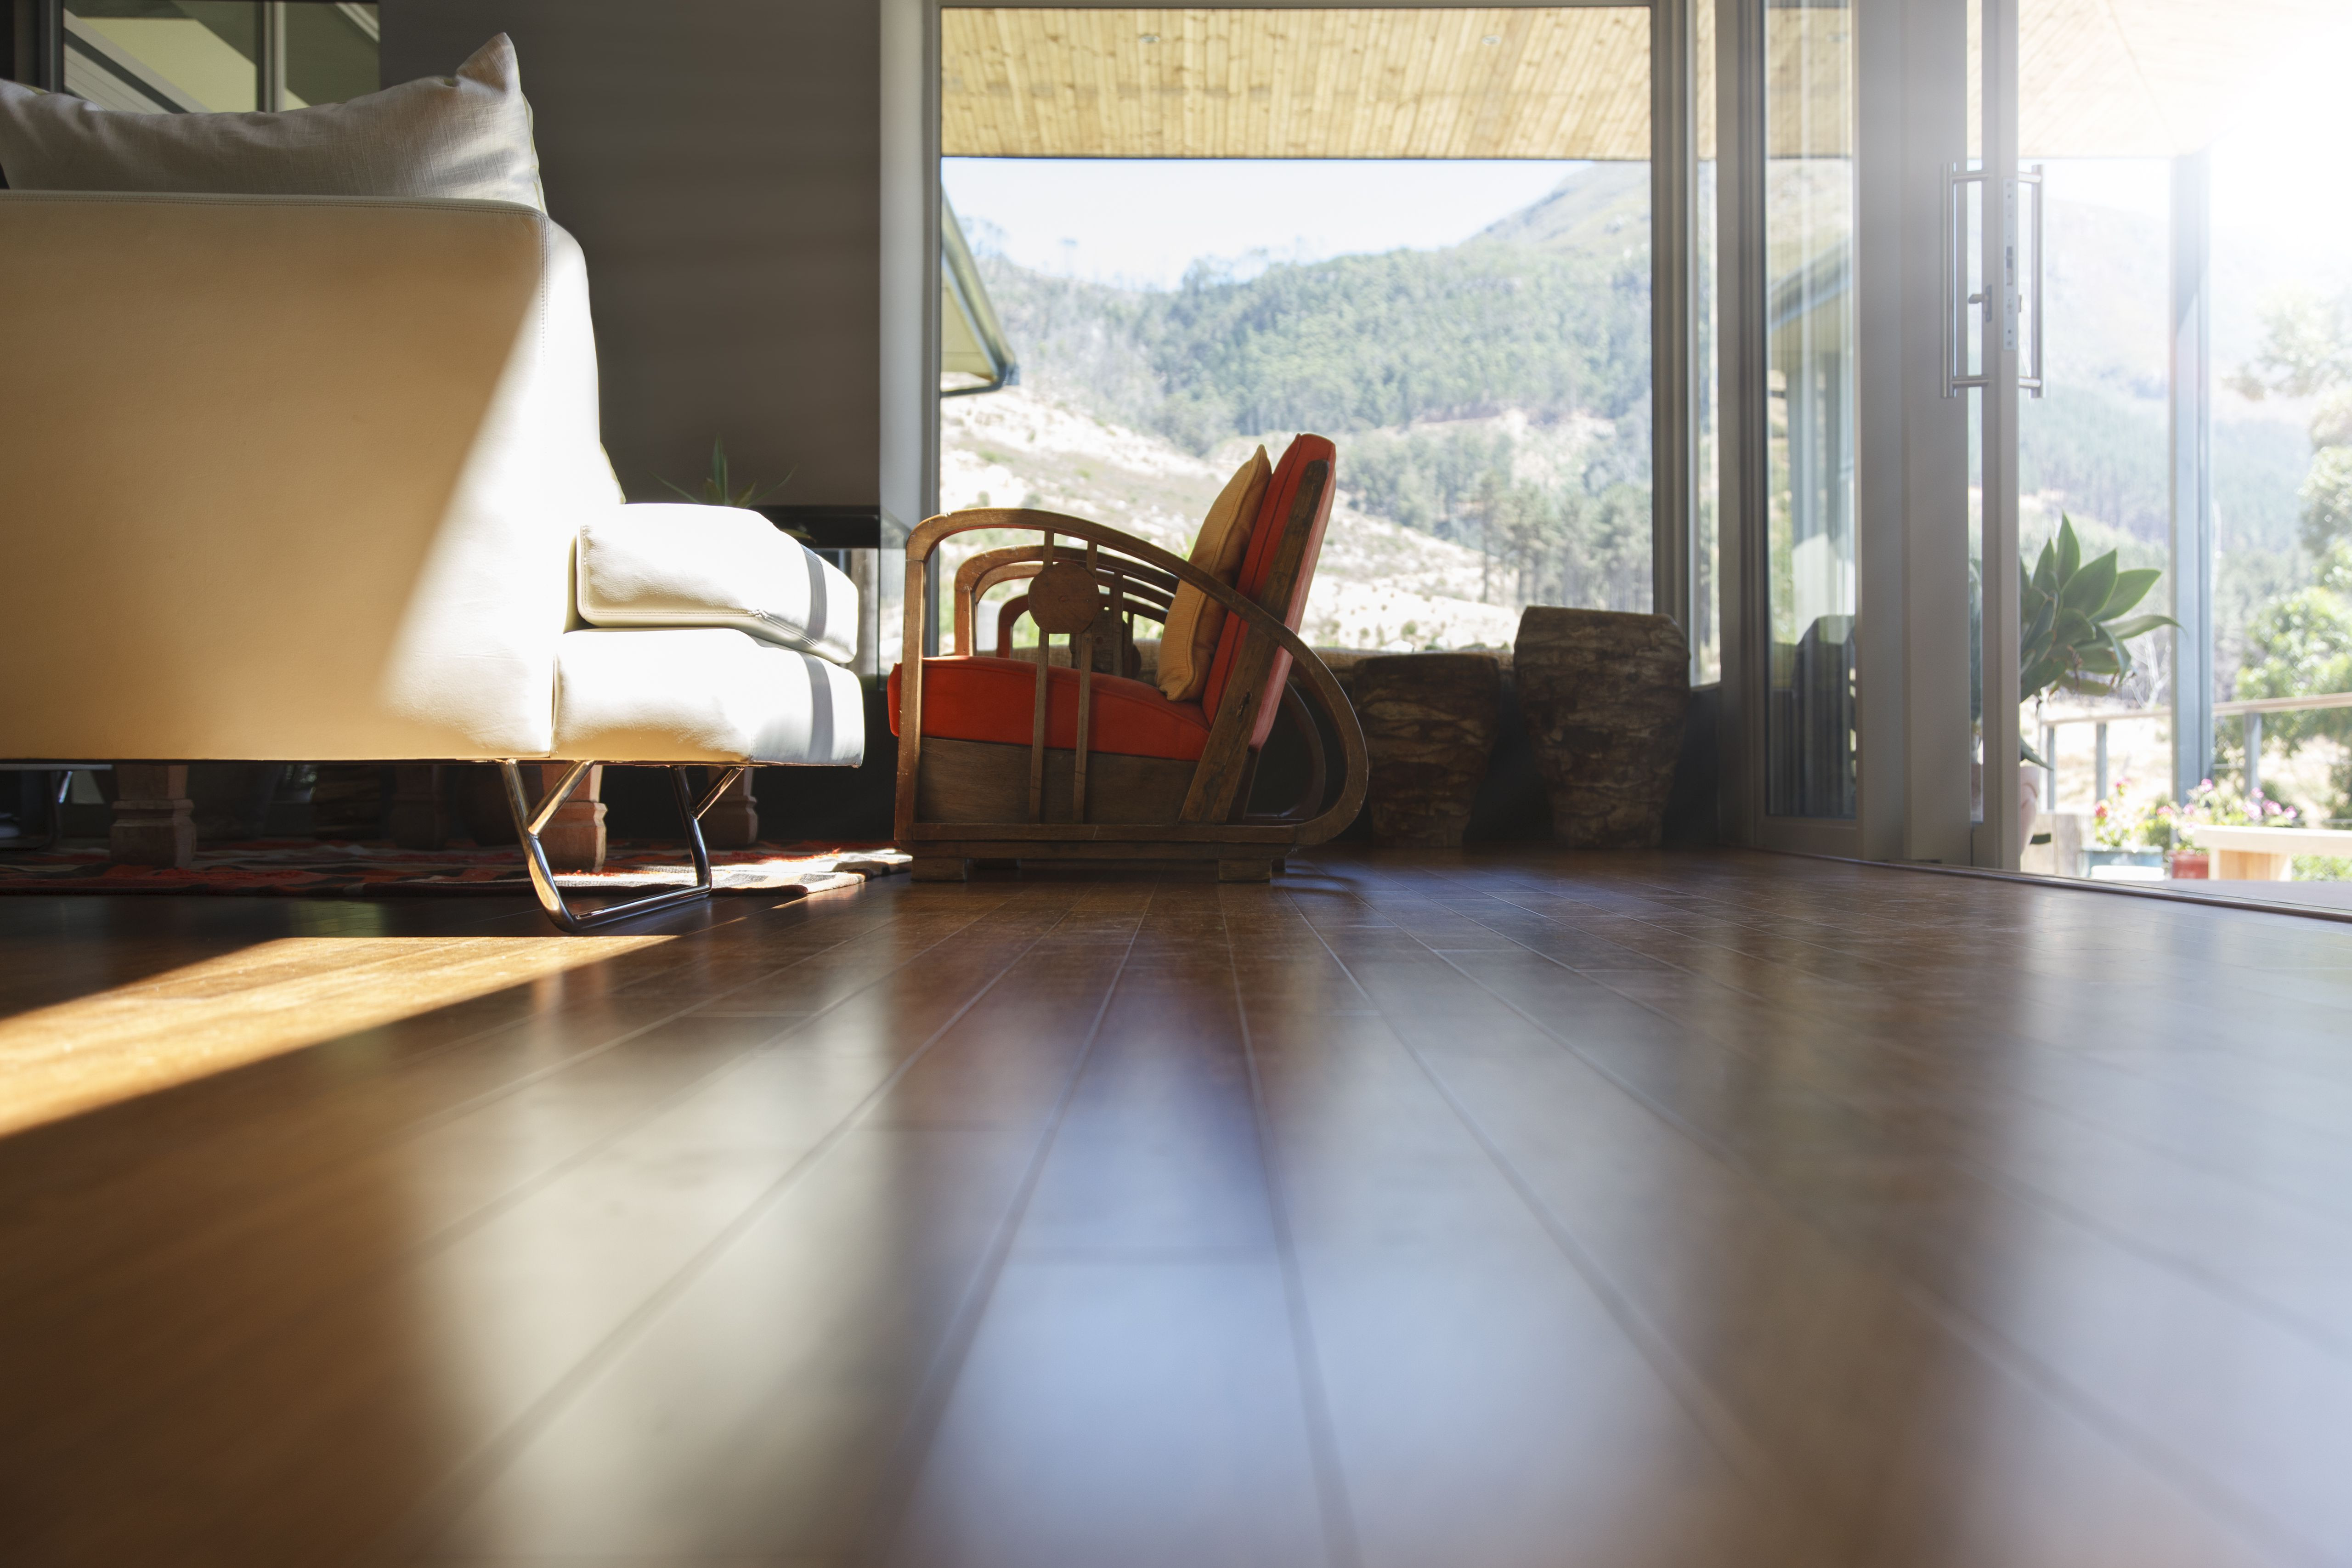 23 Unique Average Cost to Install Engineered Hardwood Flooring 2024 free download average cost to install engineered hardwood flooring of types of engineered flooring from premium hardwoods in living room interior hard wood floor and sofa 525439899 5a764f241d64040037603c1